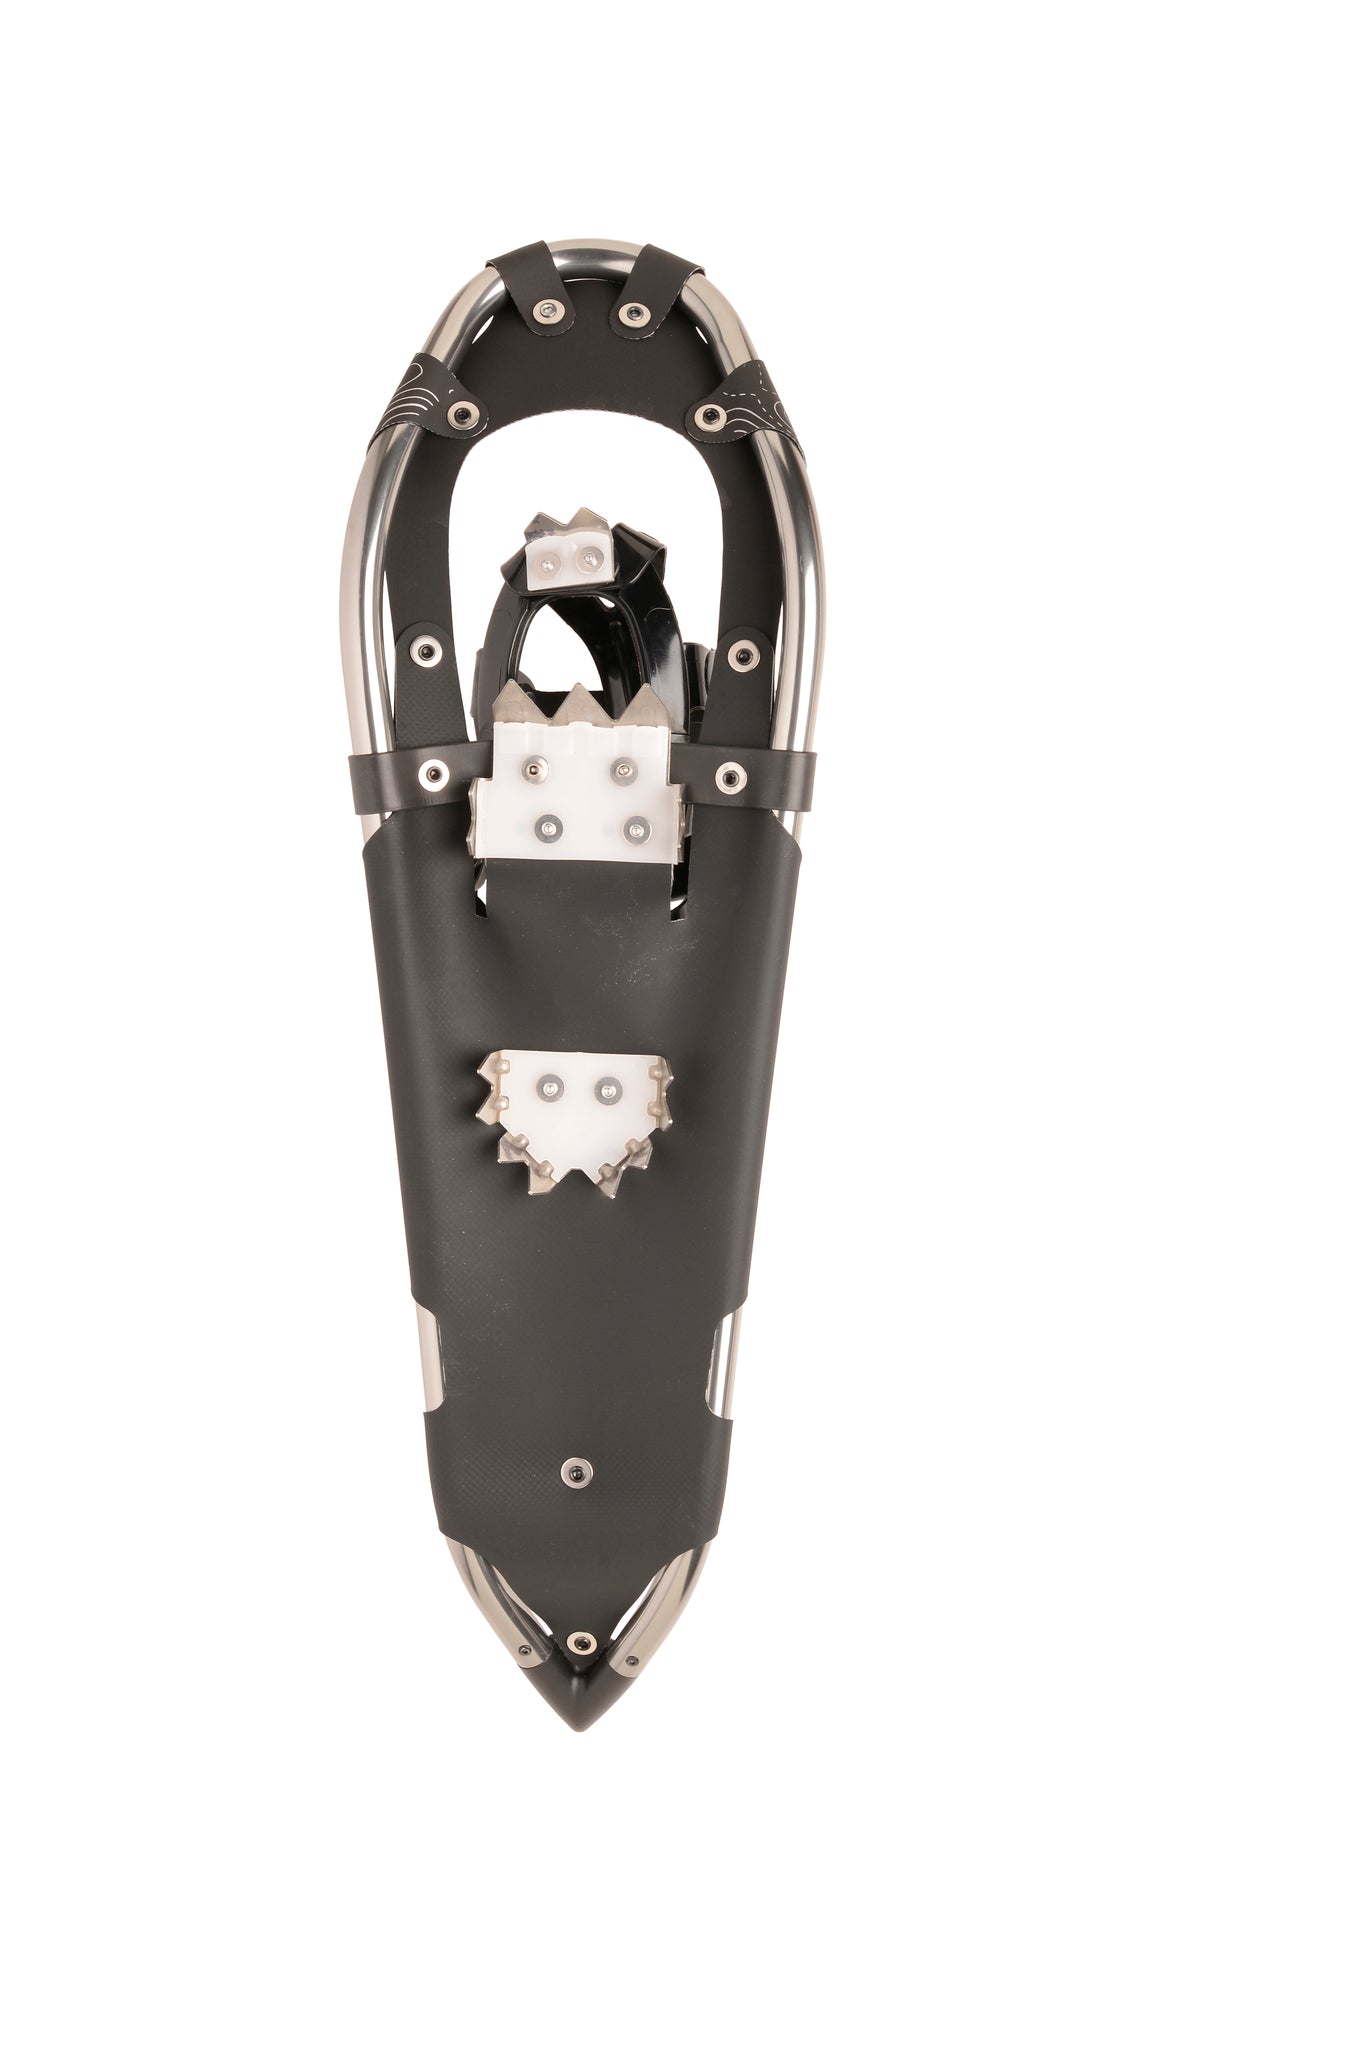 Crescent Moon All-Terrain Sawtooth 27 Silver Snowshoes - Winter 2022/2023